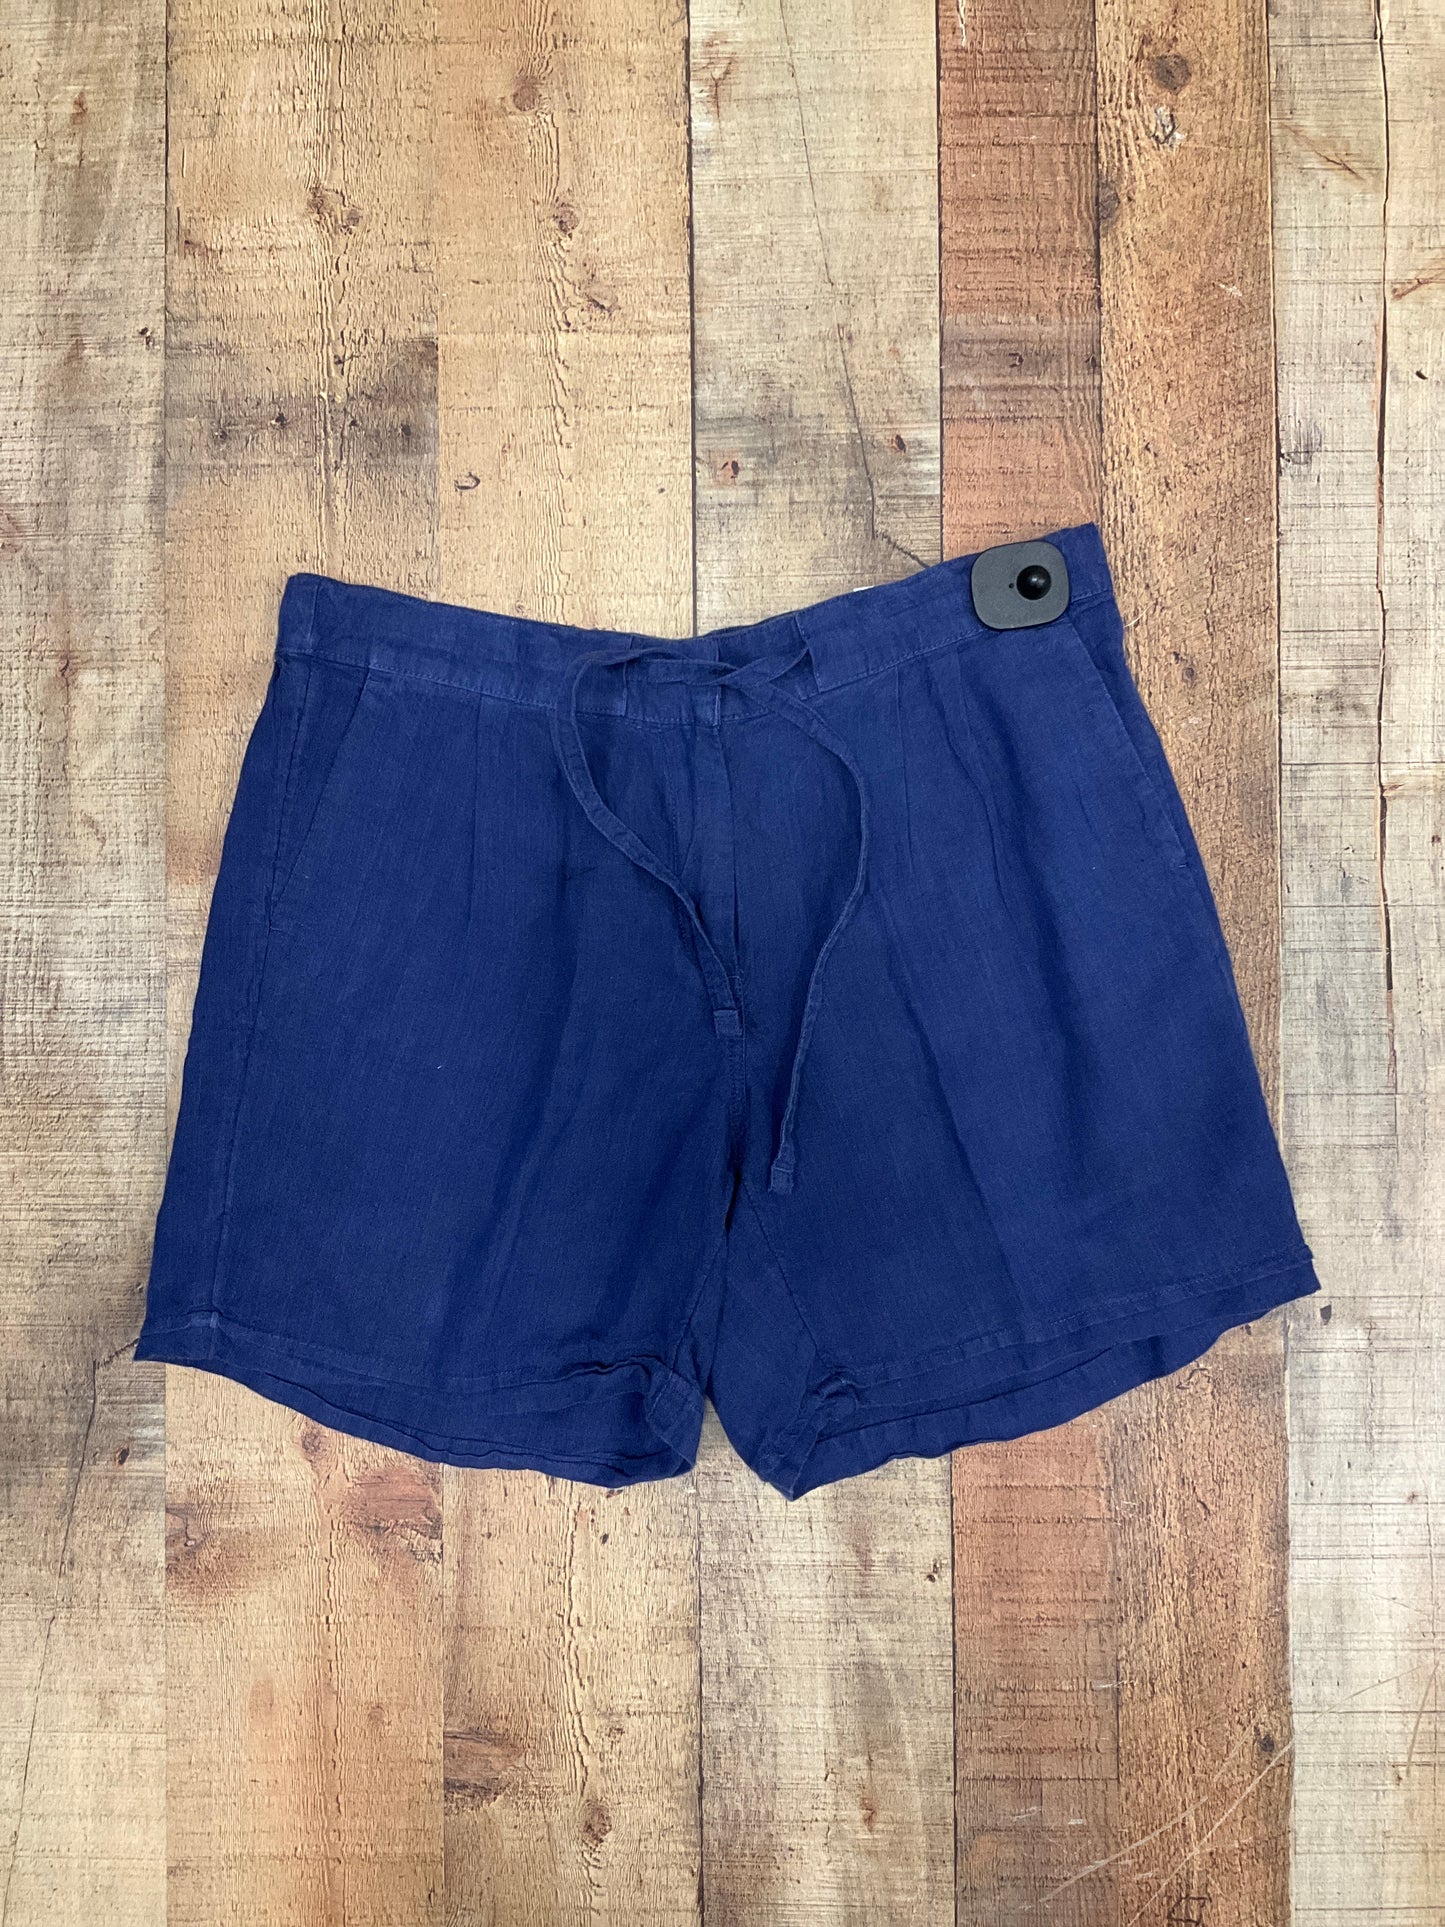 Shorts By Lands End  Size: 12petite